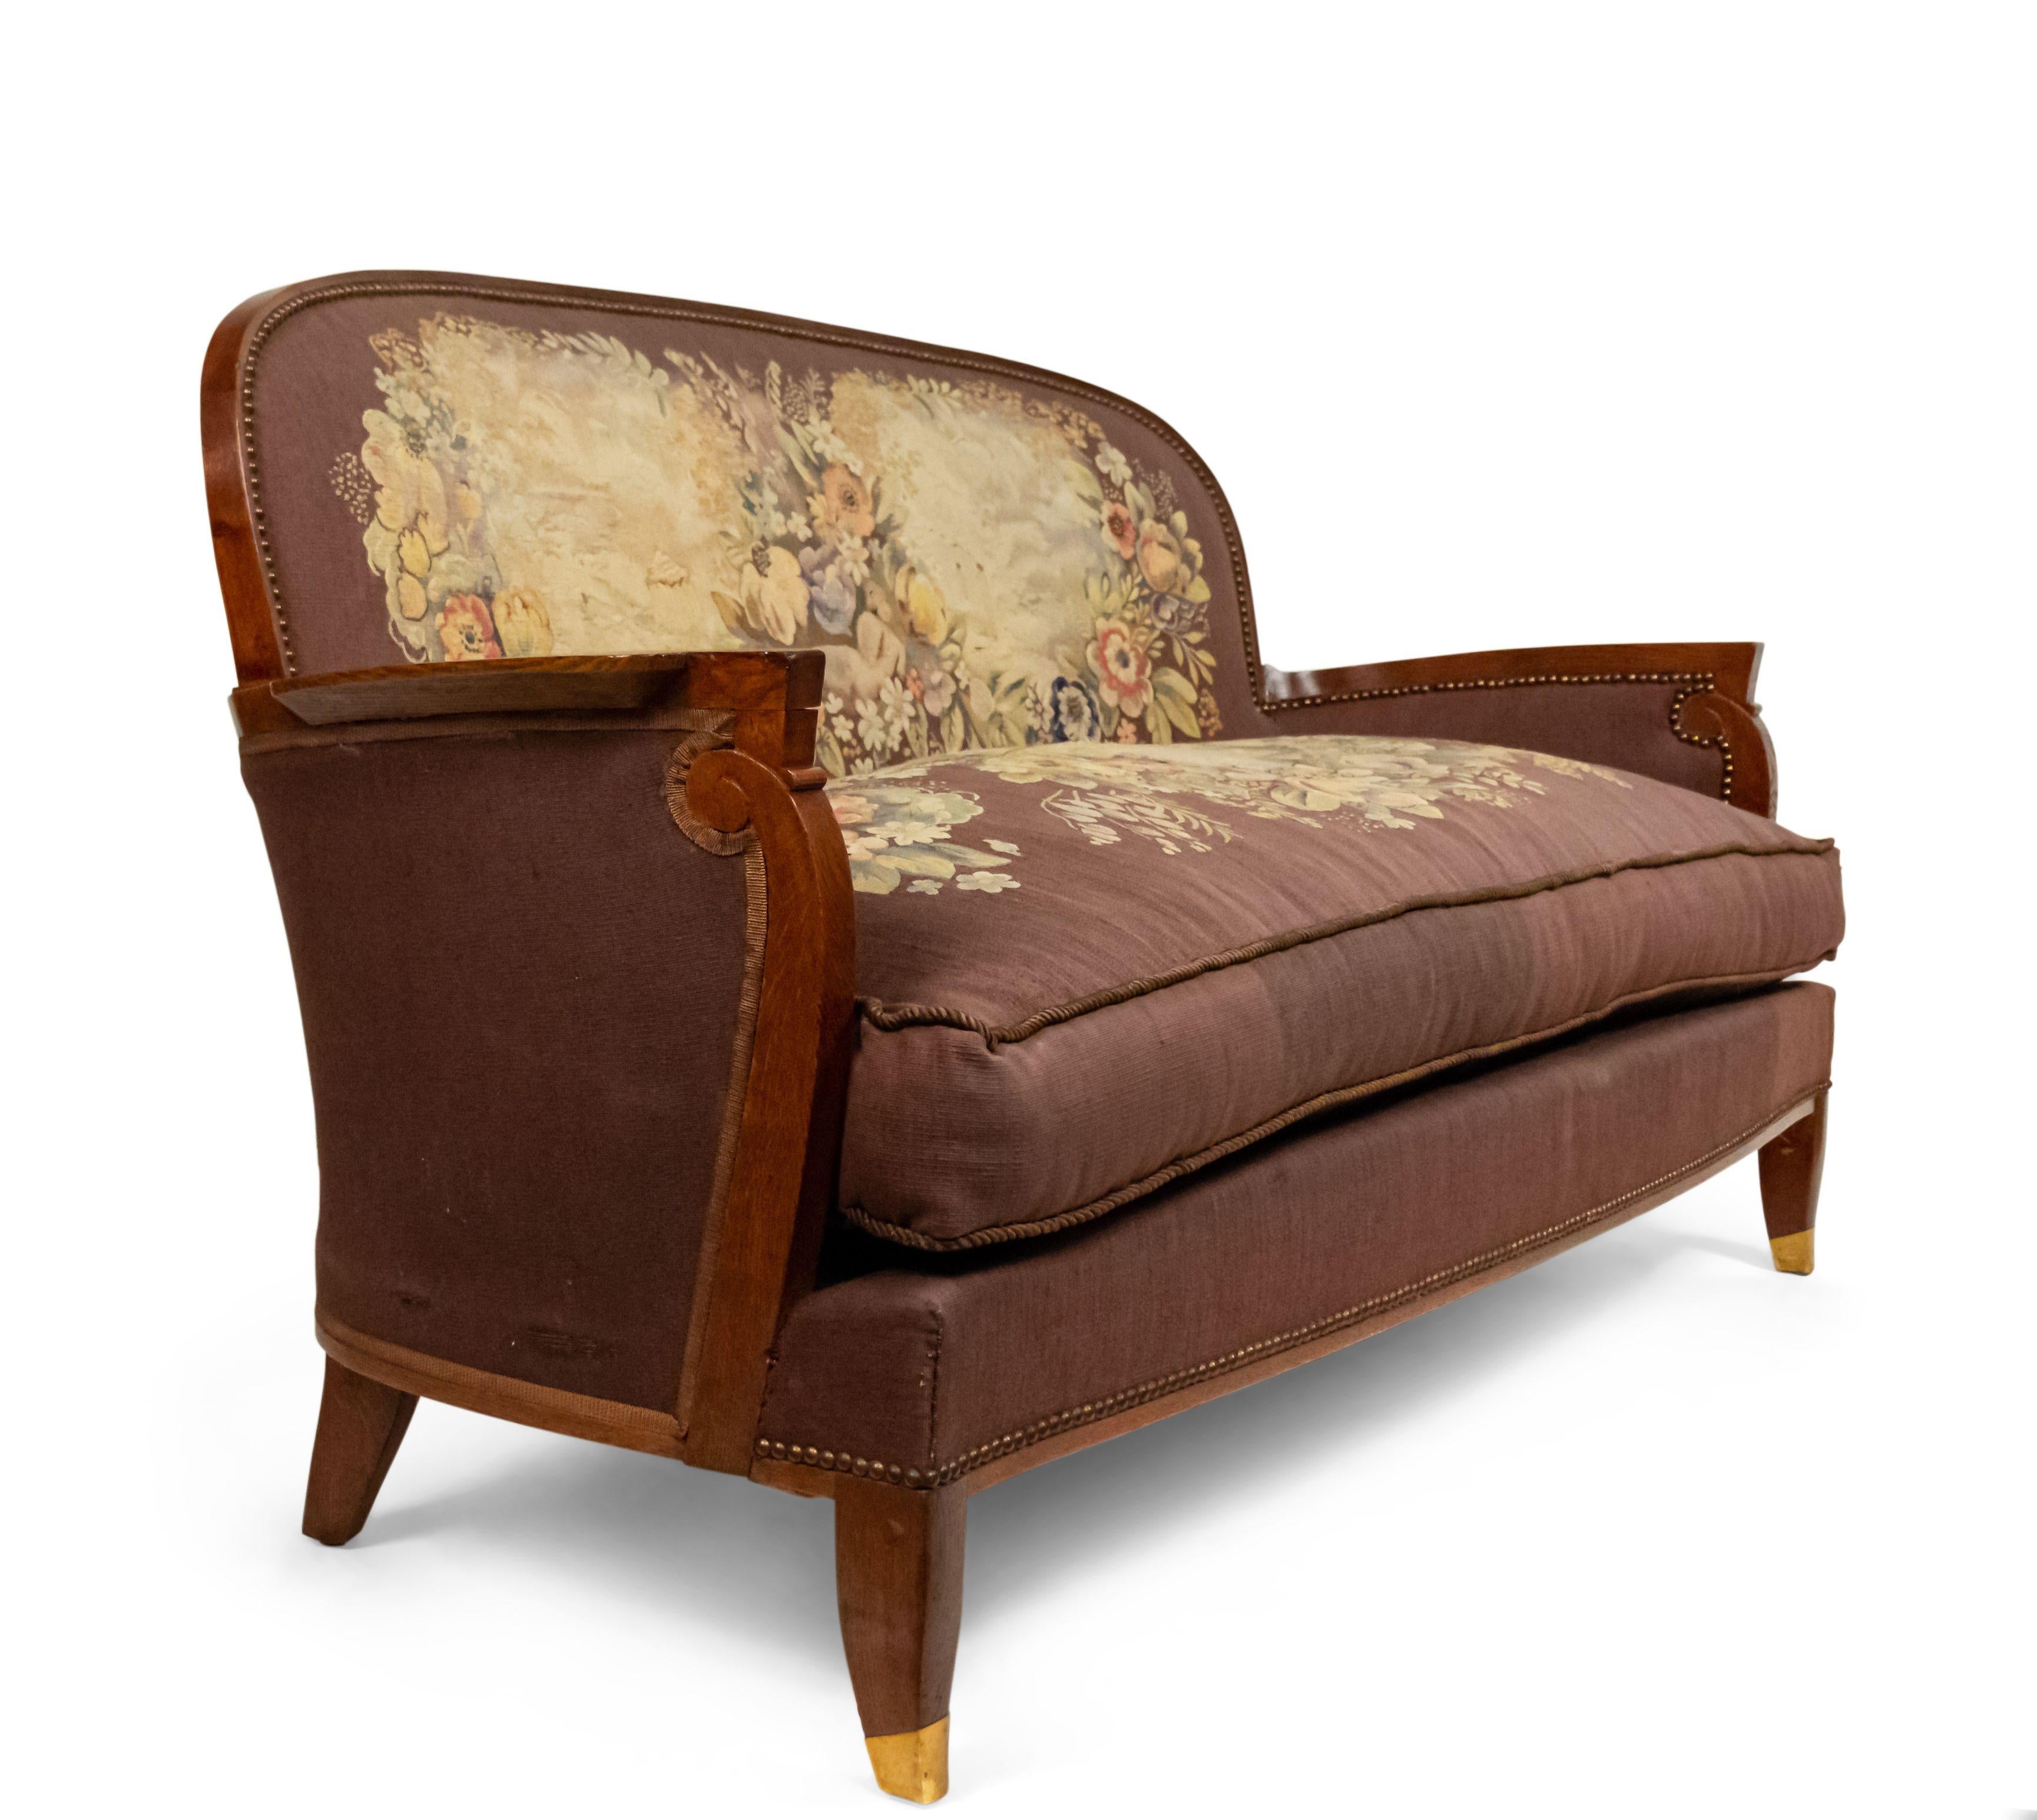 French Art Deco loveseat with tapestry upholstery (seat cushion AS IS) having a round back & scroll design arm (by JULES LELEU) (c.1940) Ref: Decorateurs Ensemble, Francoise Siriex) (similar bergeres: GRL4554, 2 arms: CHM006)
